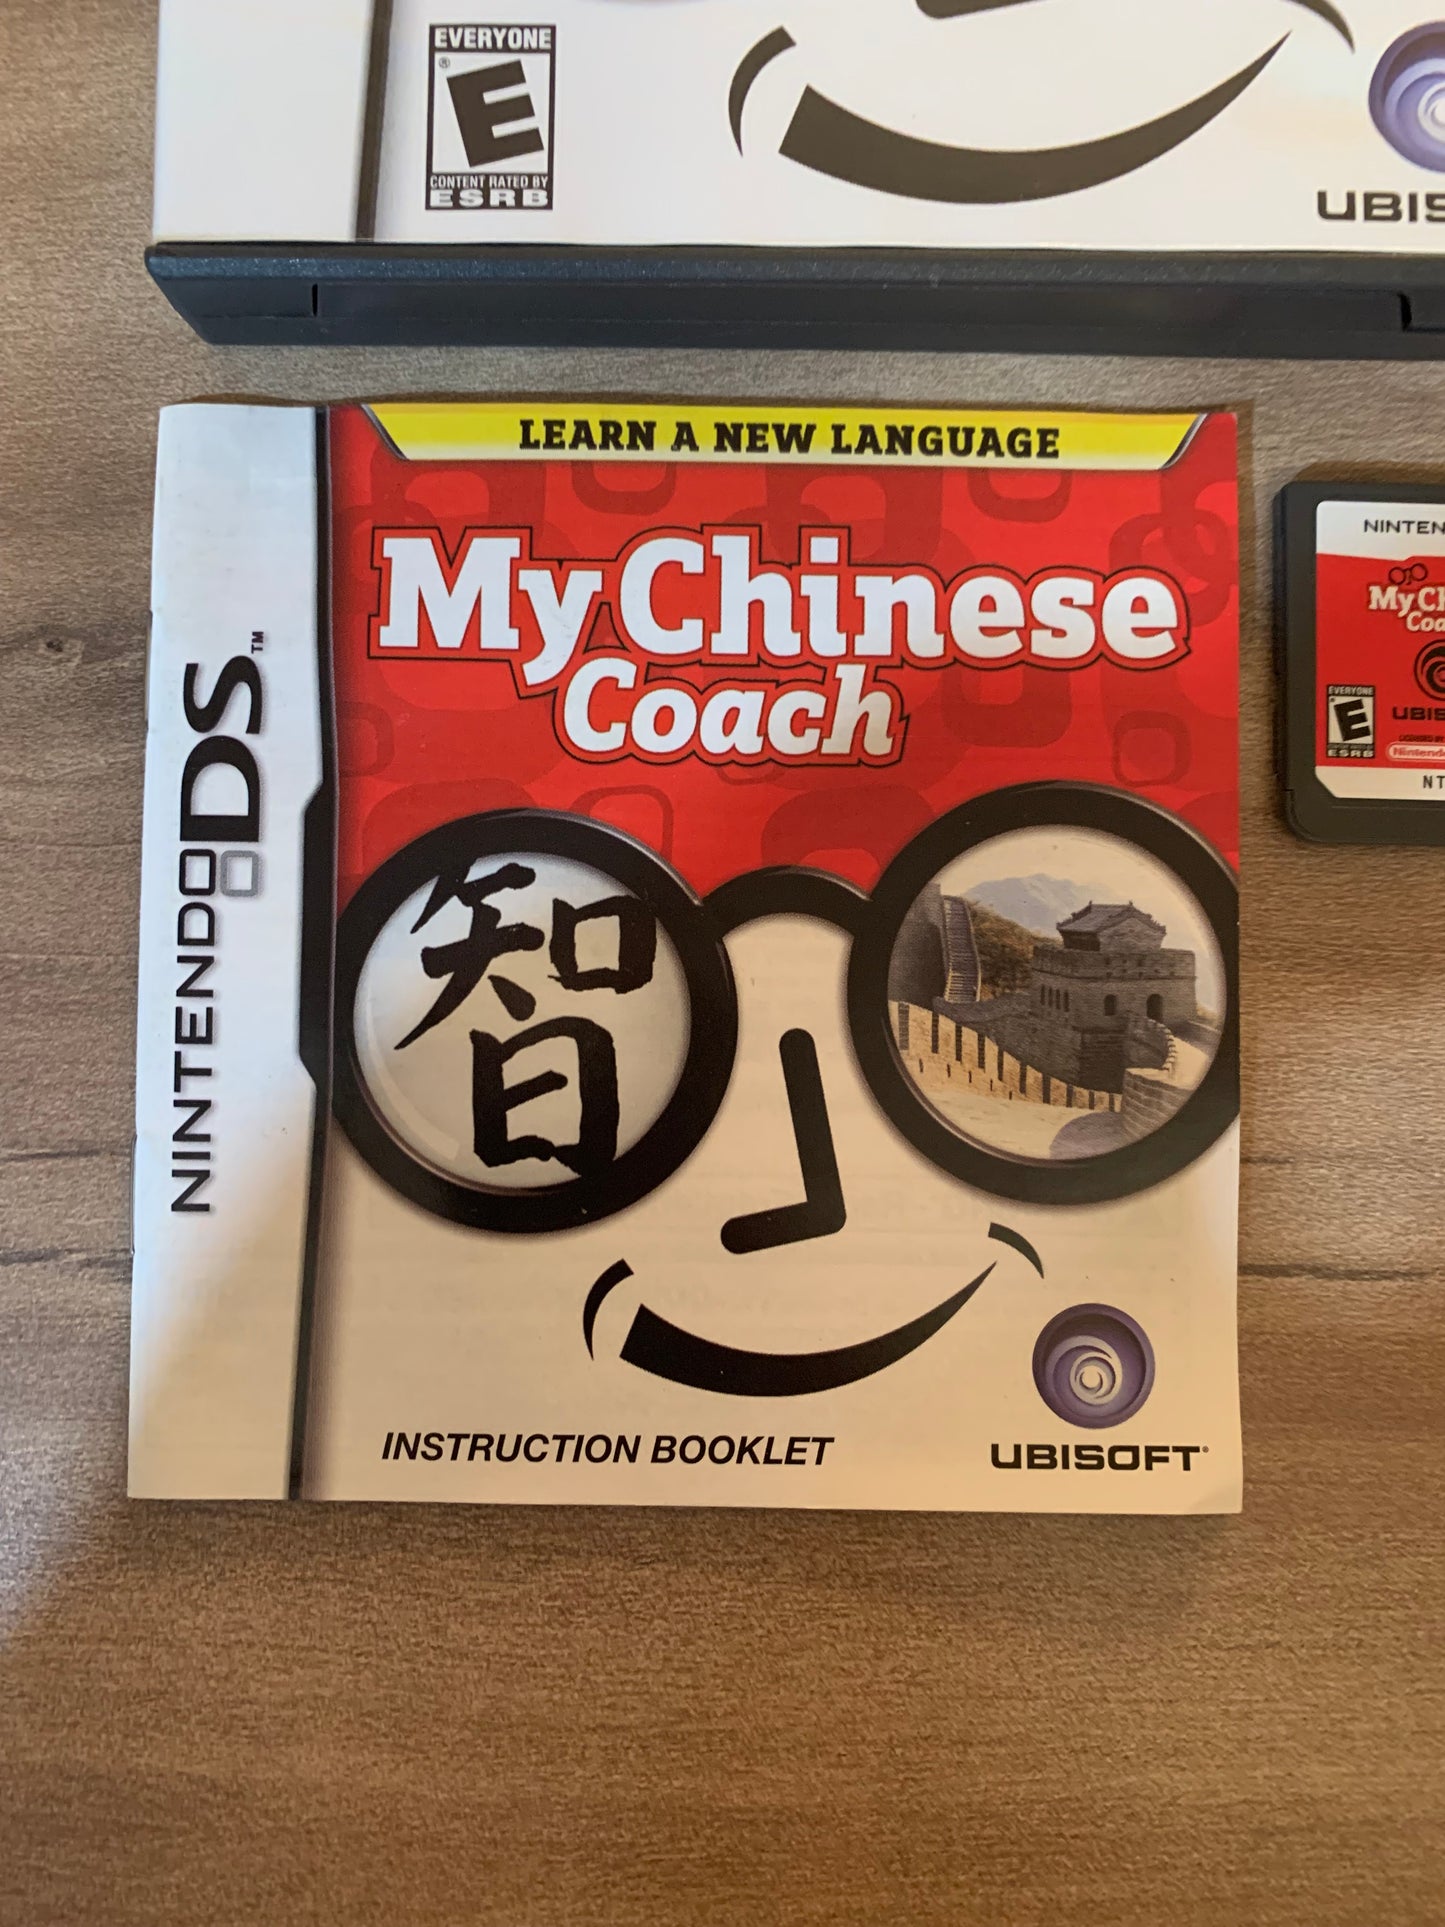 NiNTENDO DS | MY CHiNESE COACH